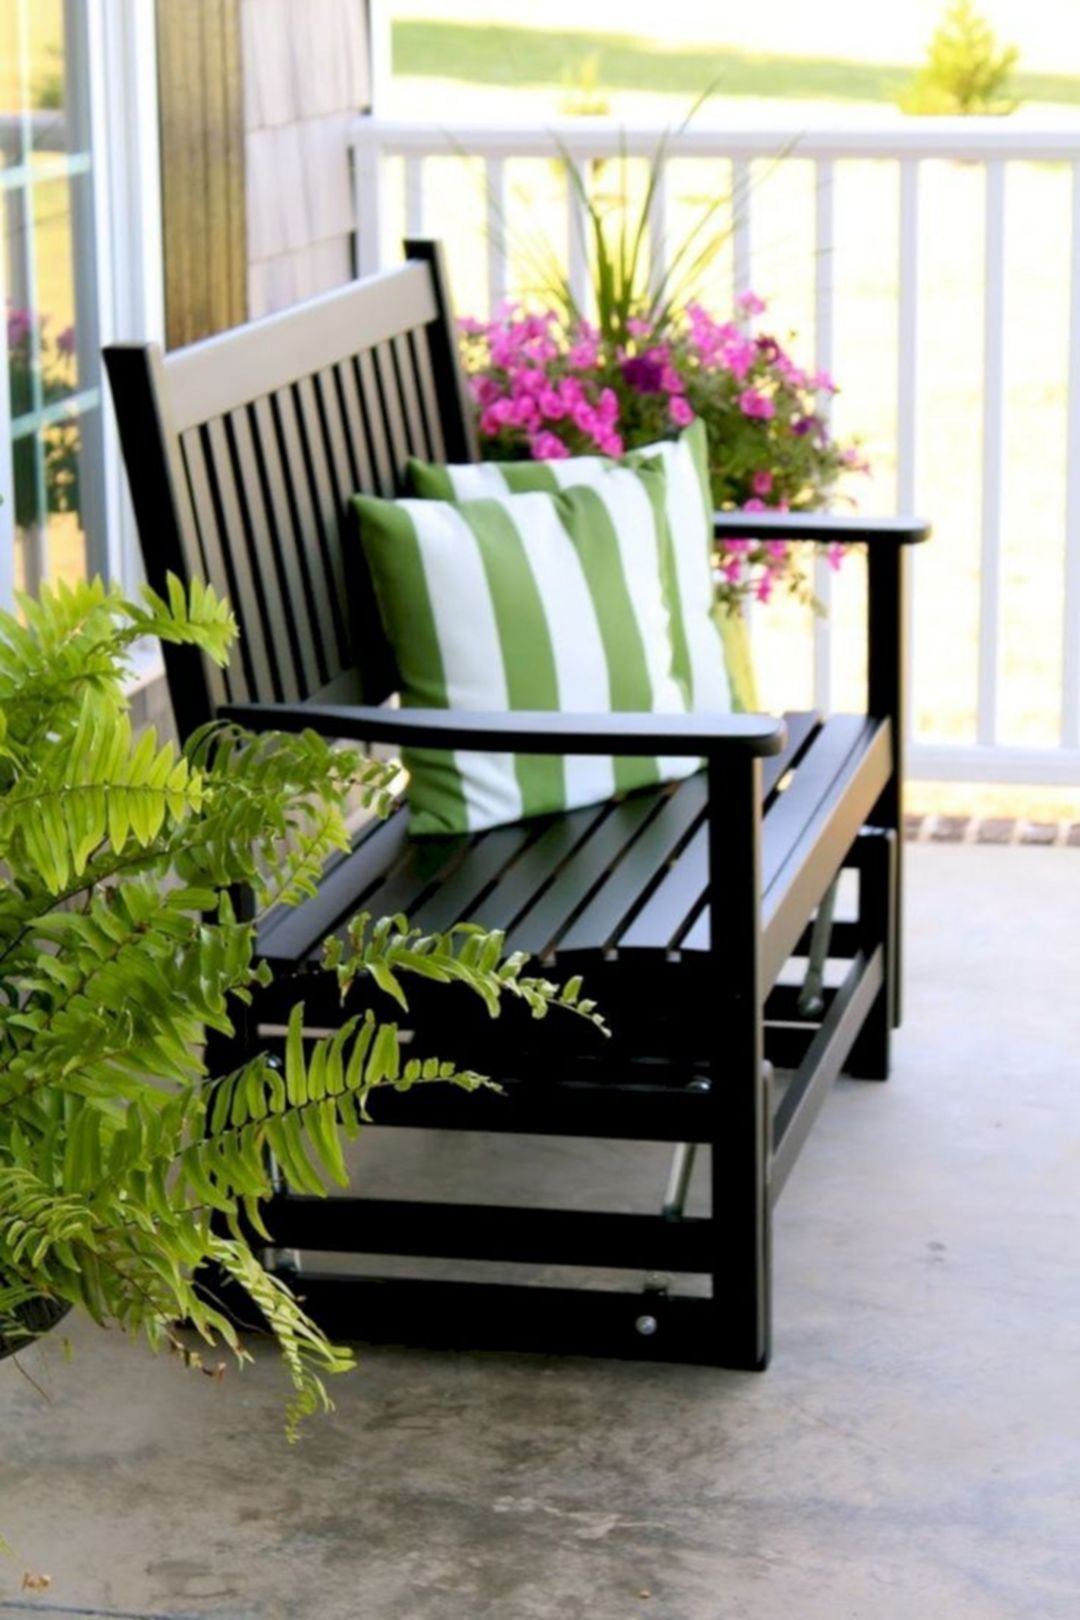 Front Porches Furniture Ideas To Inspire
You